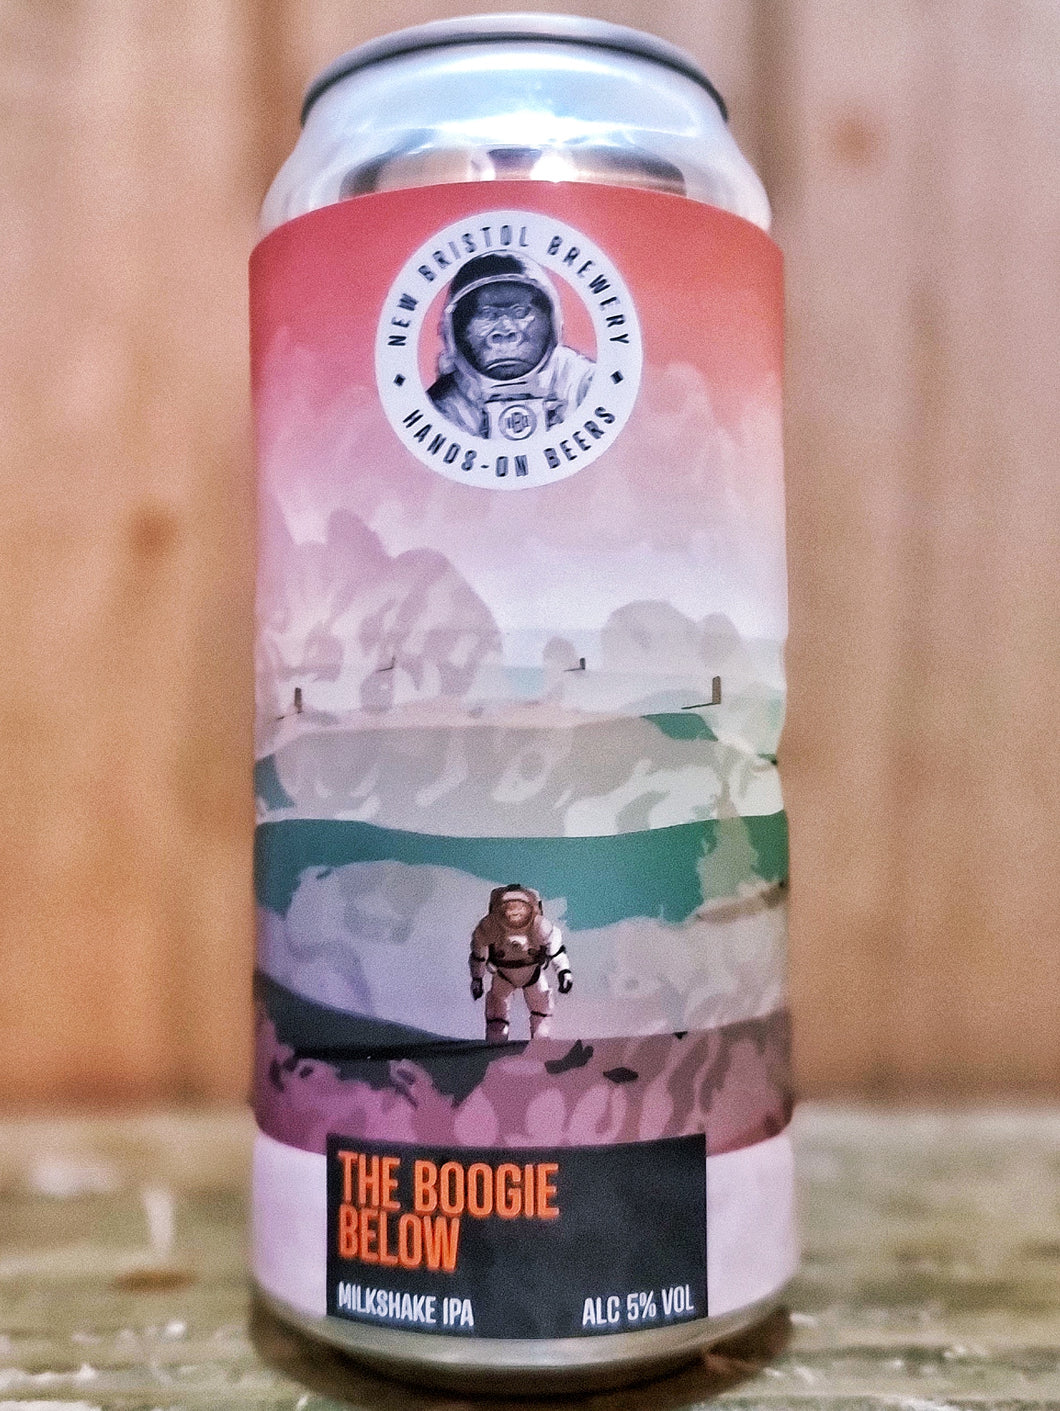 New Bristol Brewing Co - The Boogie Below